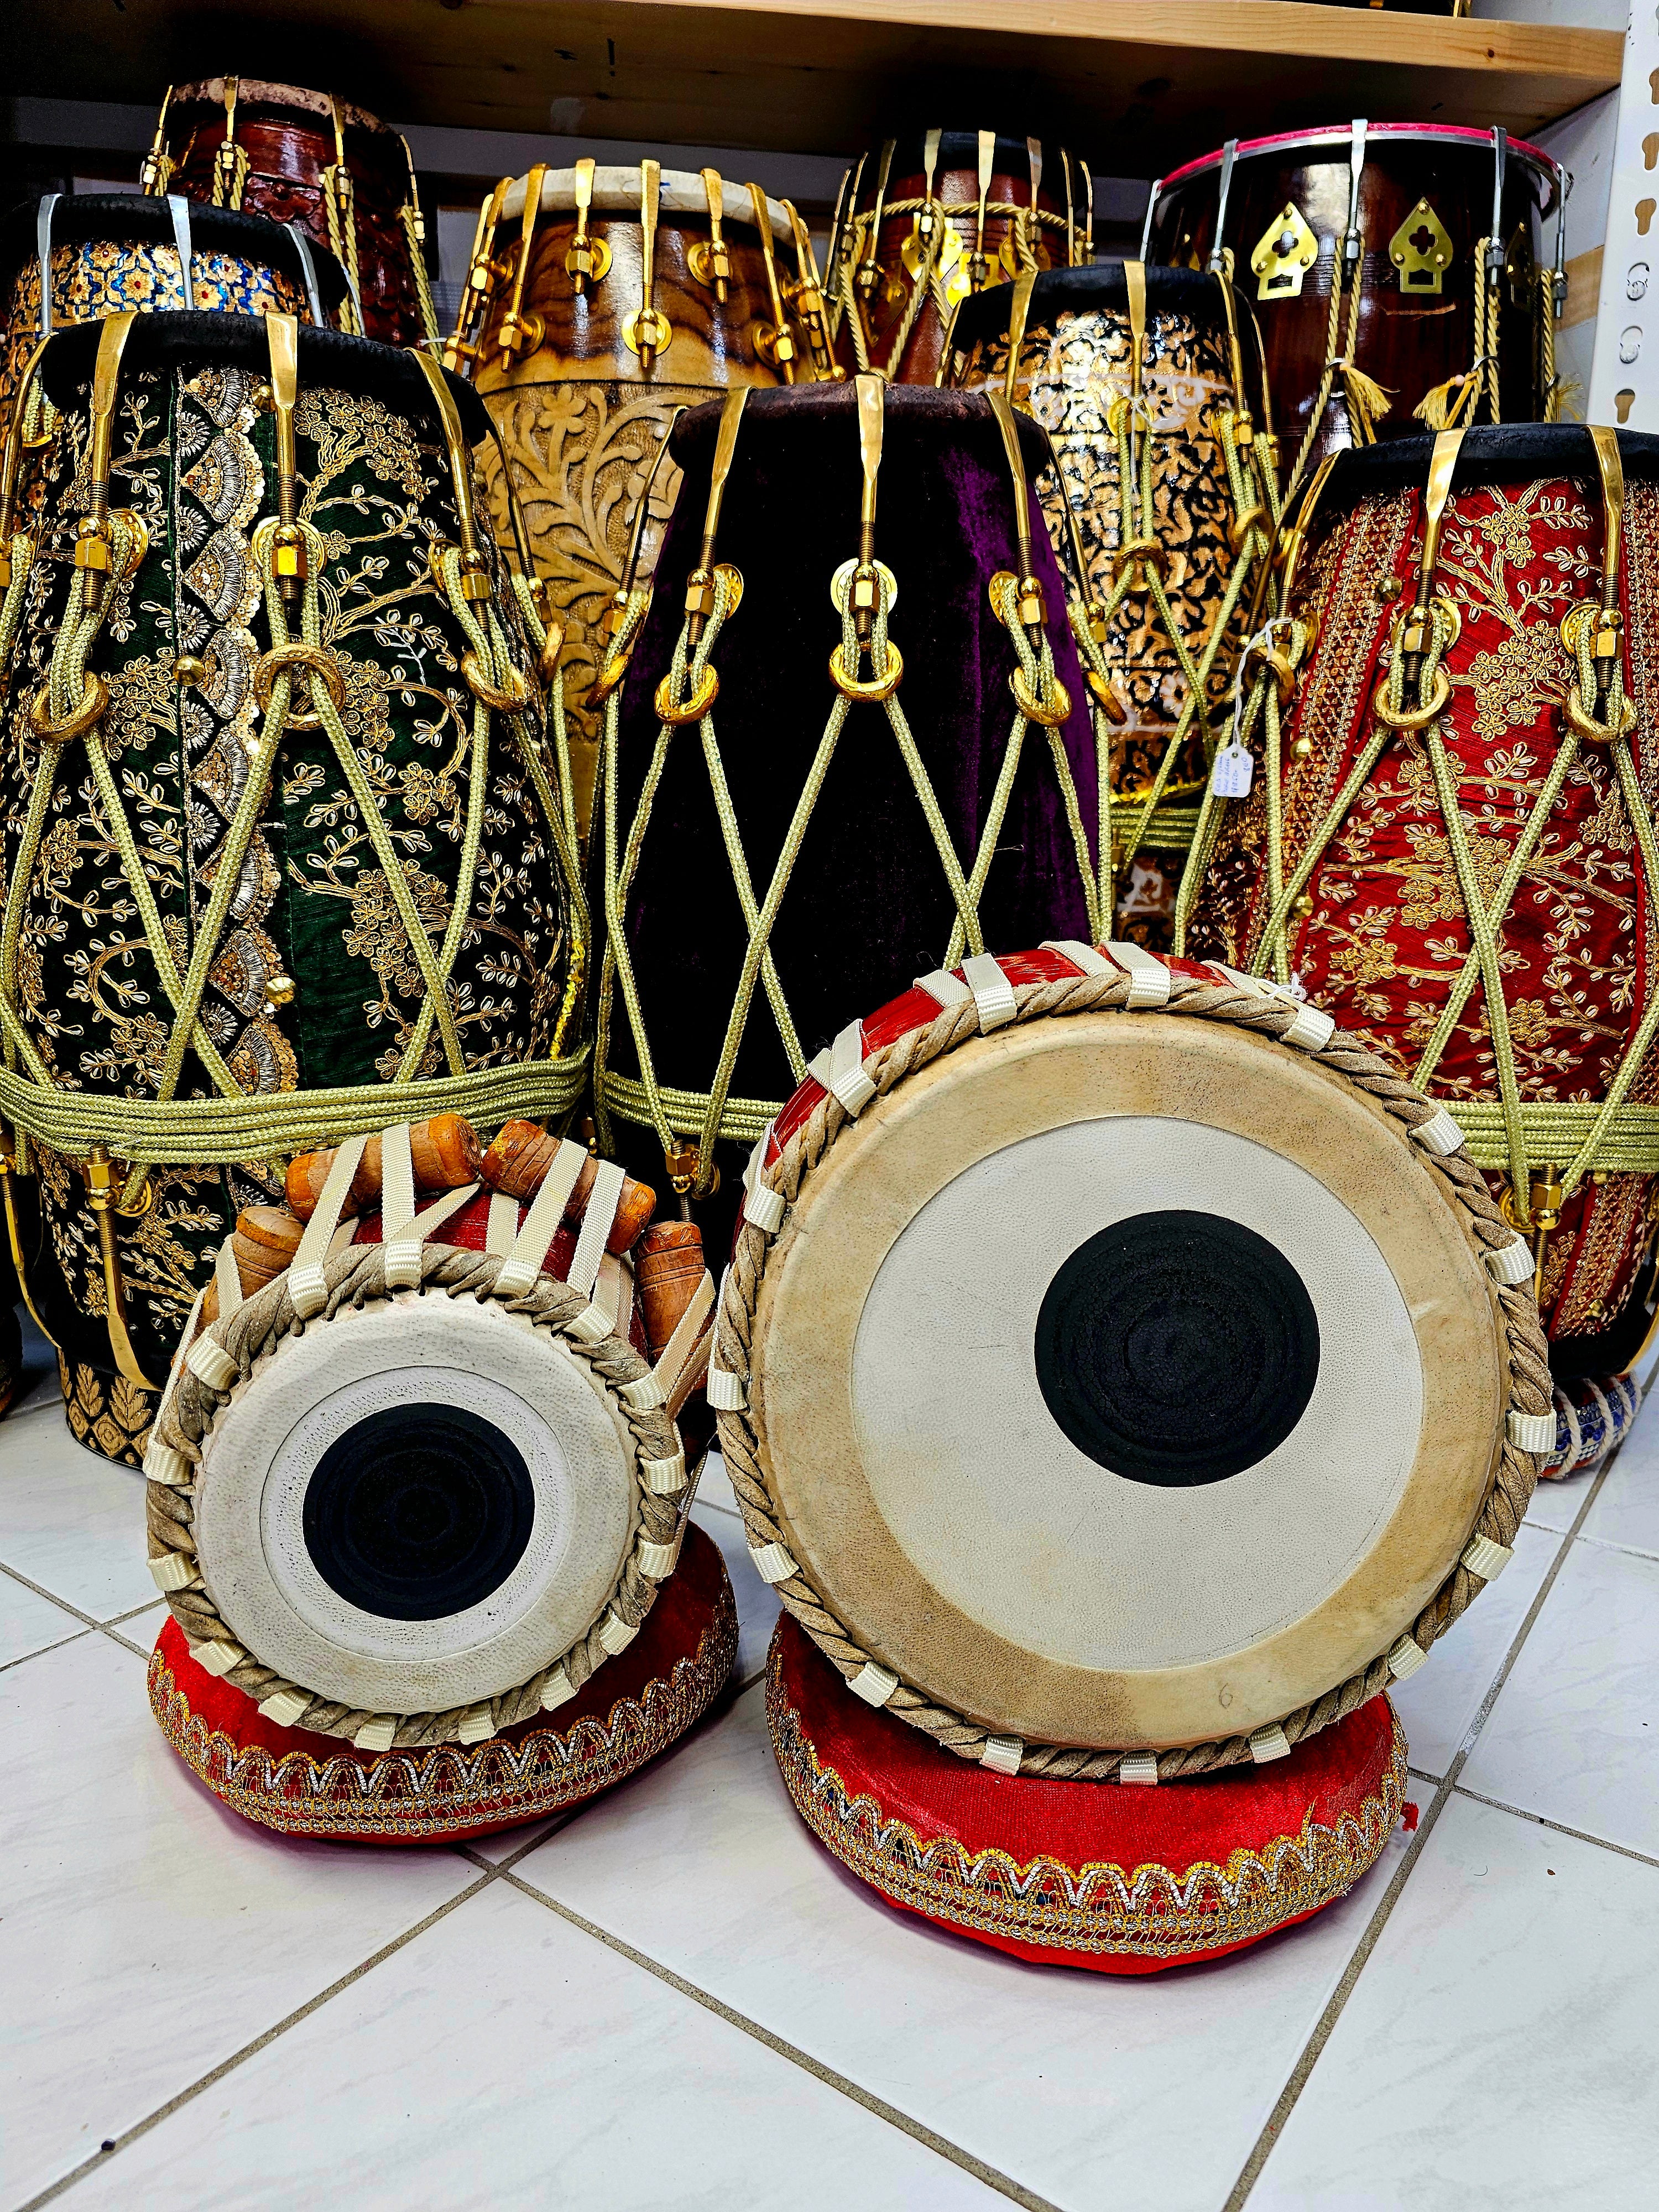 Rhythmic Rouge: 5" C# Mango Wood Dayan + 8.75" Steel Bayan Red Painted Tabla Set with Minor Buzzing Defect and Minor Cosmetic Defects